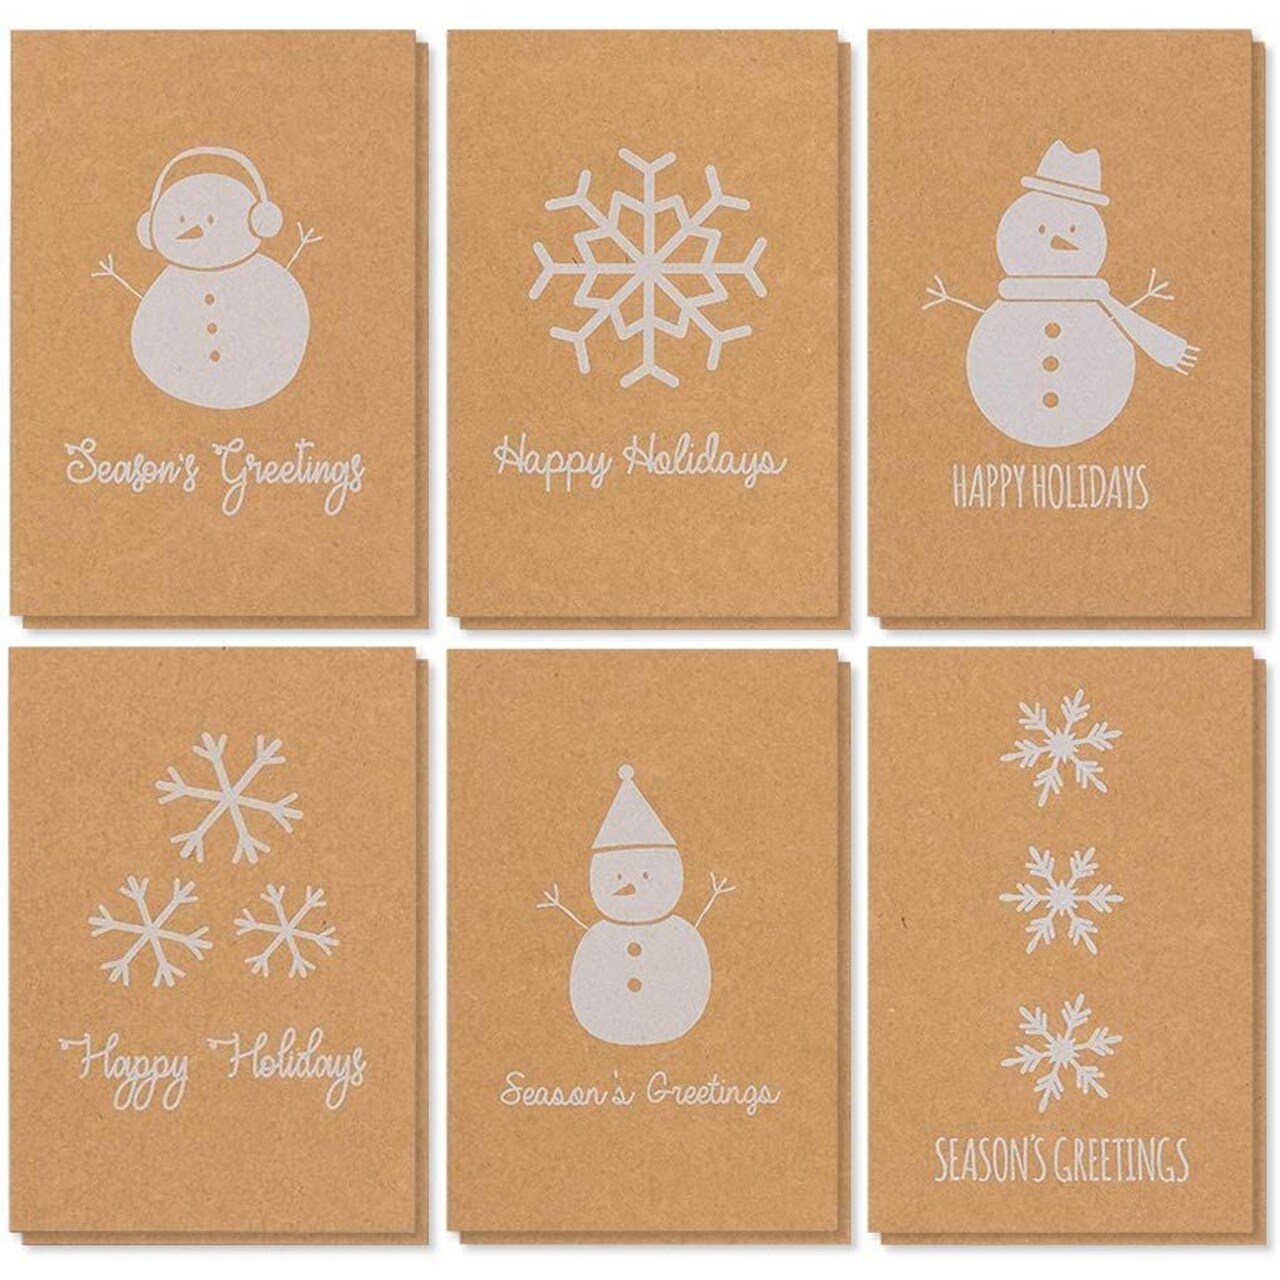 36 Pack Kraft Merry Christmas Greeting Cards Assortment with Envelopes, Holiday Yuletide Designs (4 x 6 In)